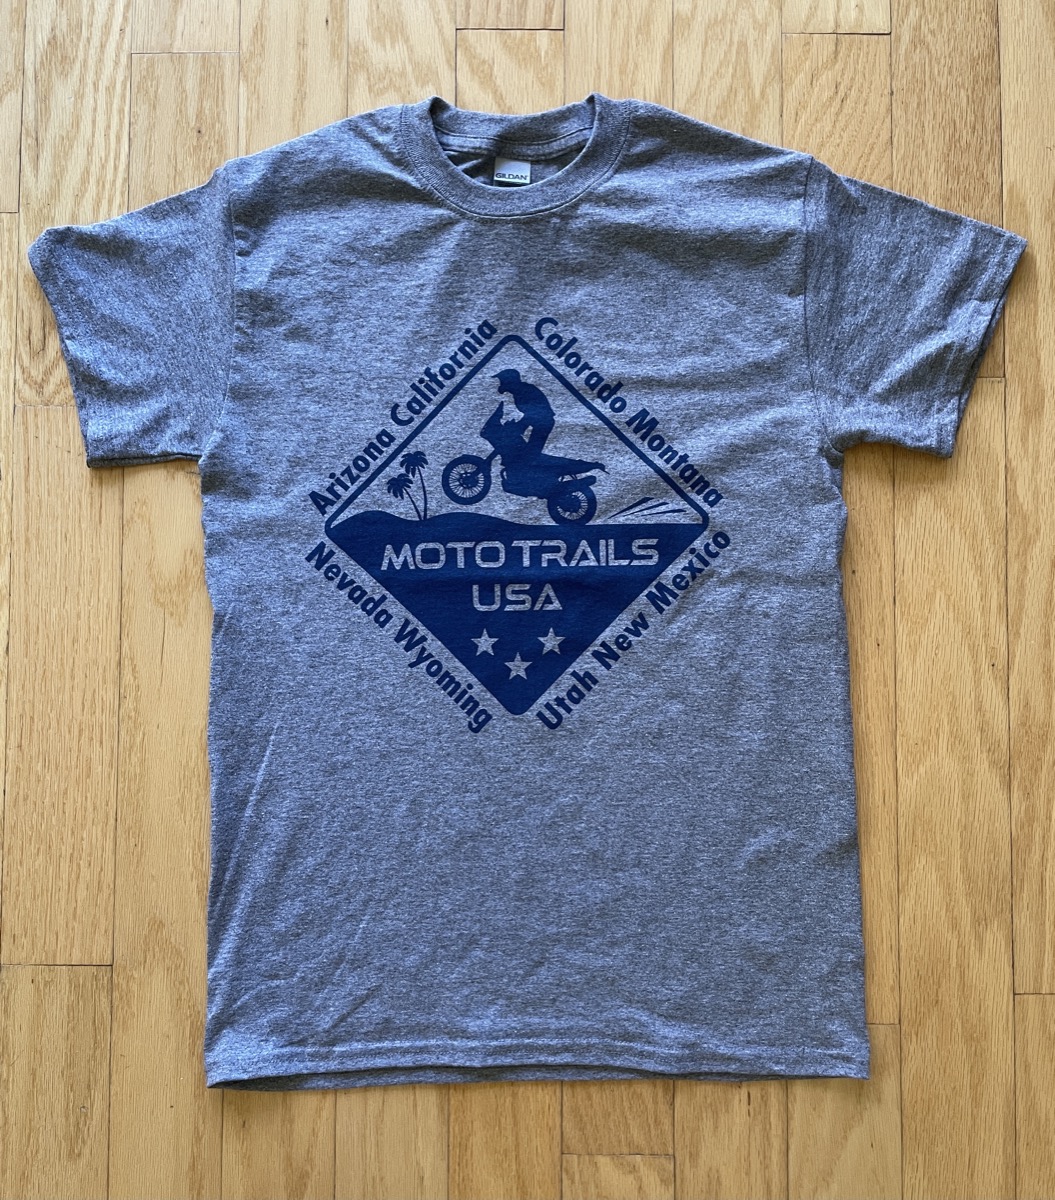 Grey T-shirt Moto Trails USA with states | Moto Trails USA motorcycle ...